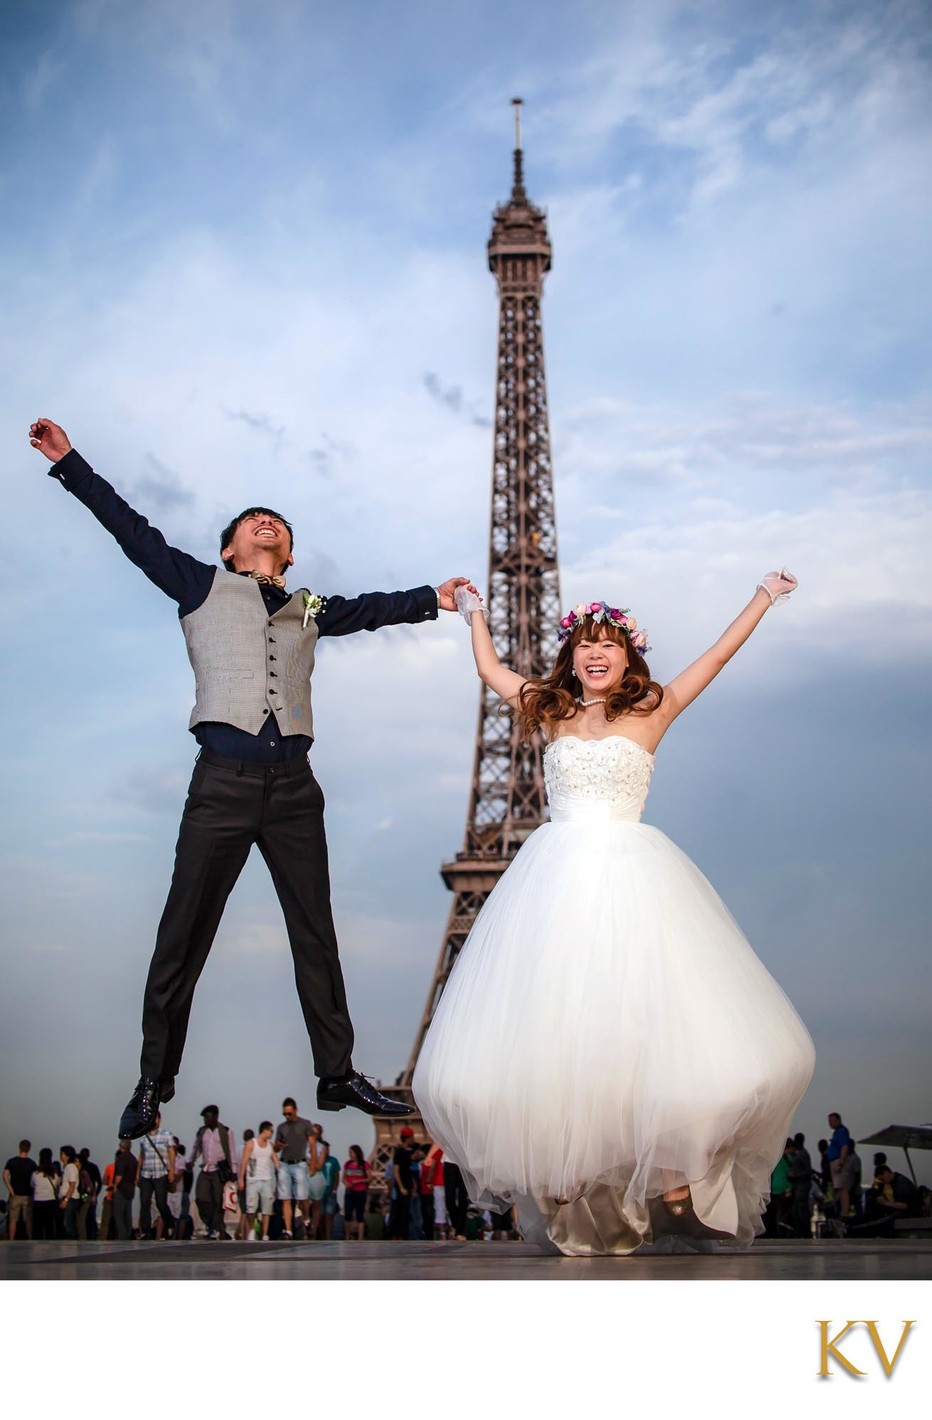 Newlyweds doing it their way at Eiffel Tower